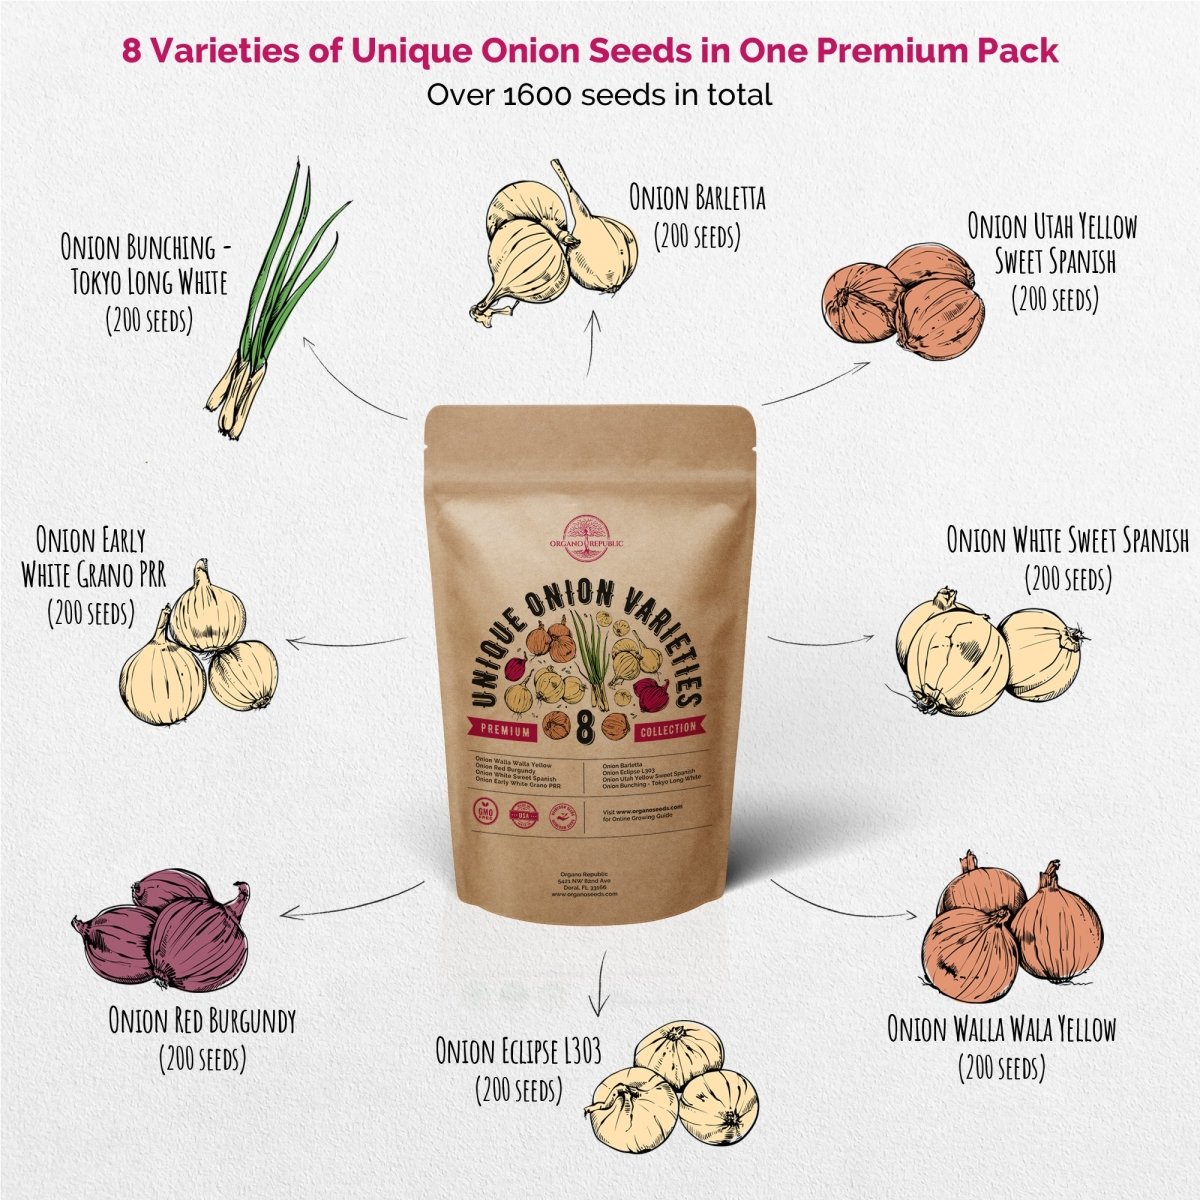 25 Winter Vegetable & 8 Onions Seeds Variety Packs Bundle Non-GMO Heirloom Seeds for Planting Indoor and Outdoor Over 8100 Vegetables & Onion Seeds in One Value Bundle - Organo Republic